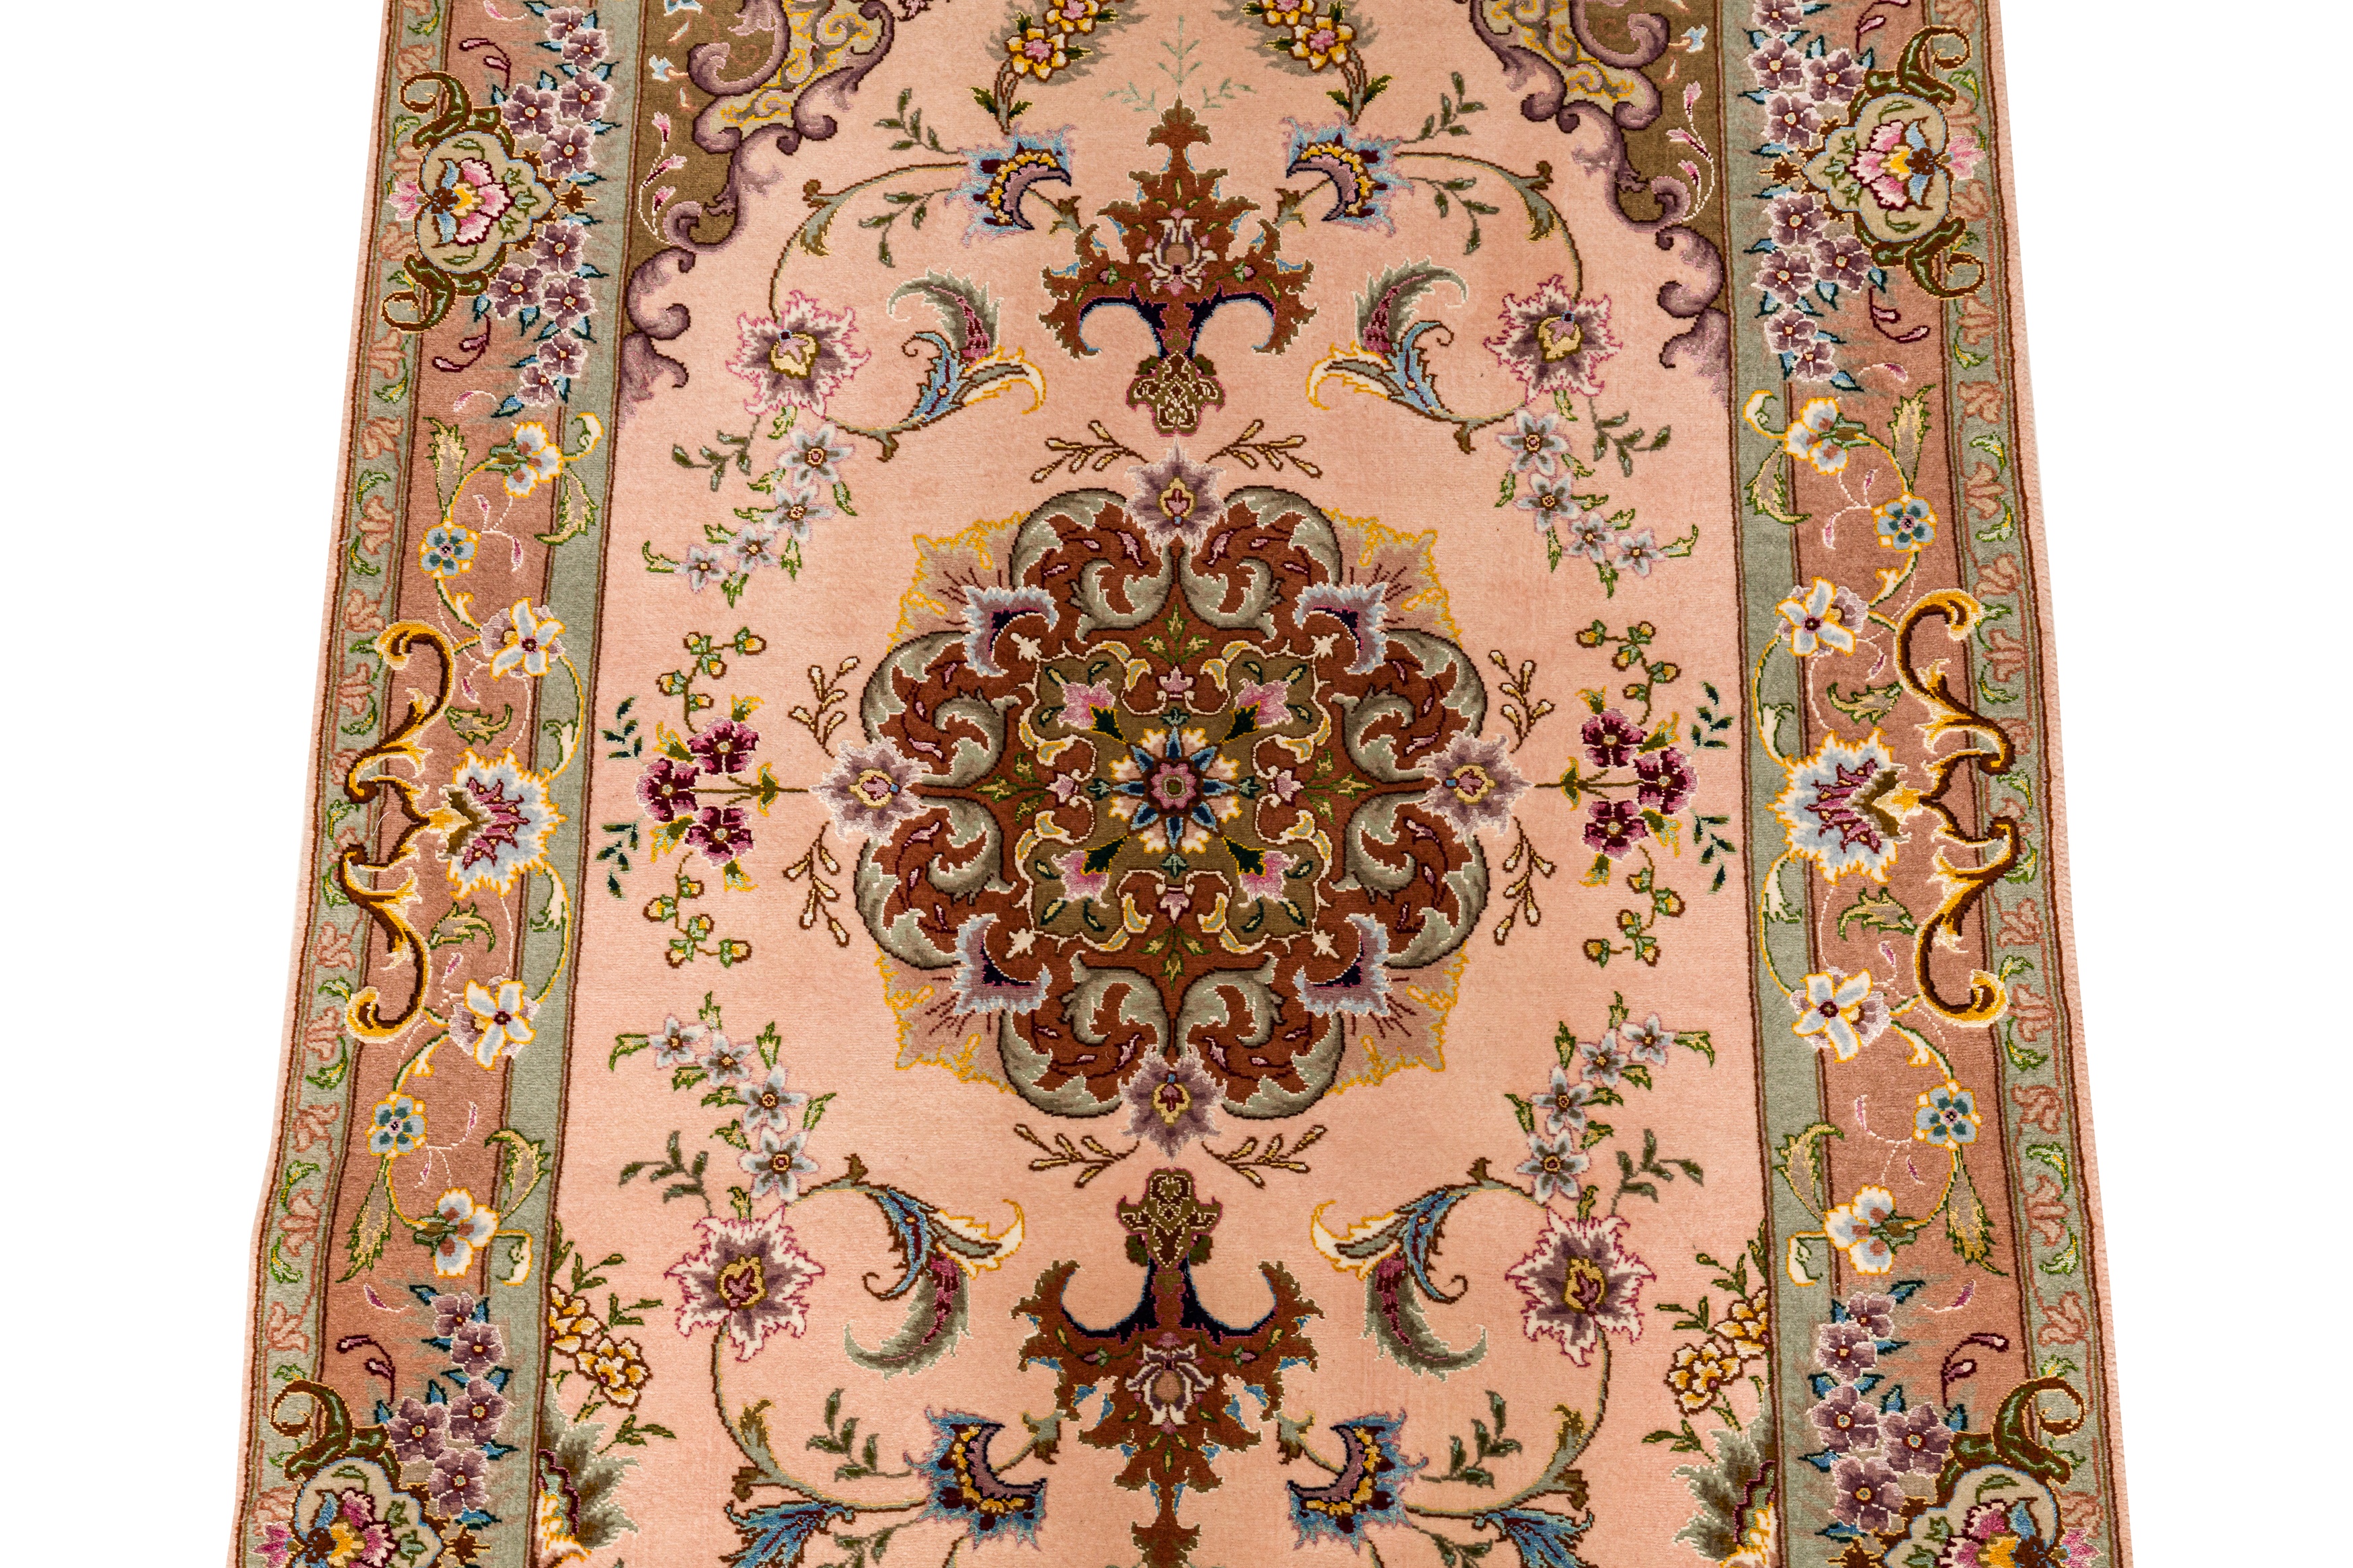 A VERY FINE PART SILK TABRIZ RUNNER, NORTH-WEST PERSIA - Image 4 of 8